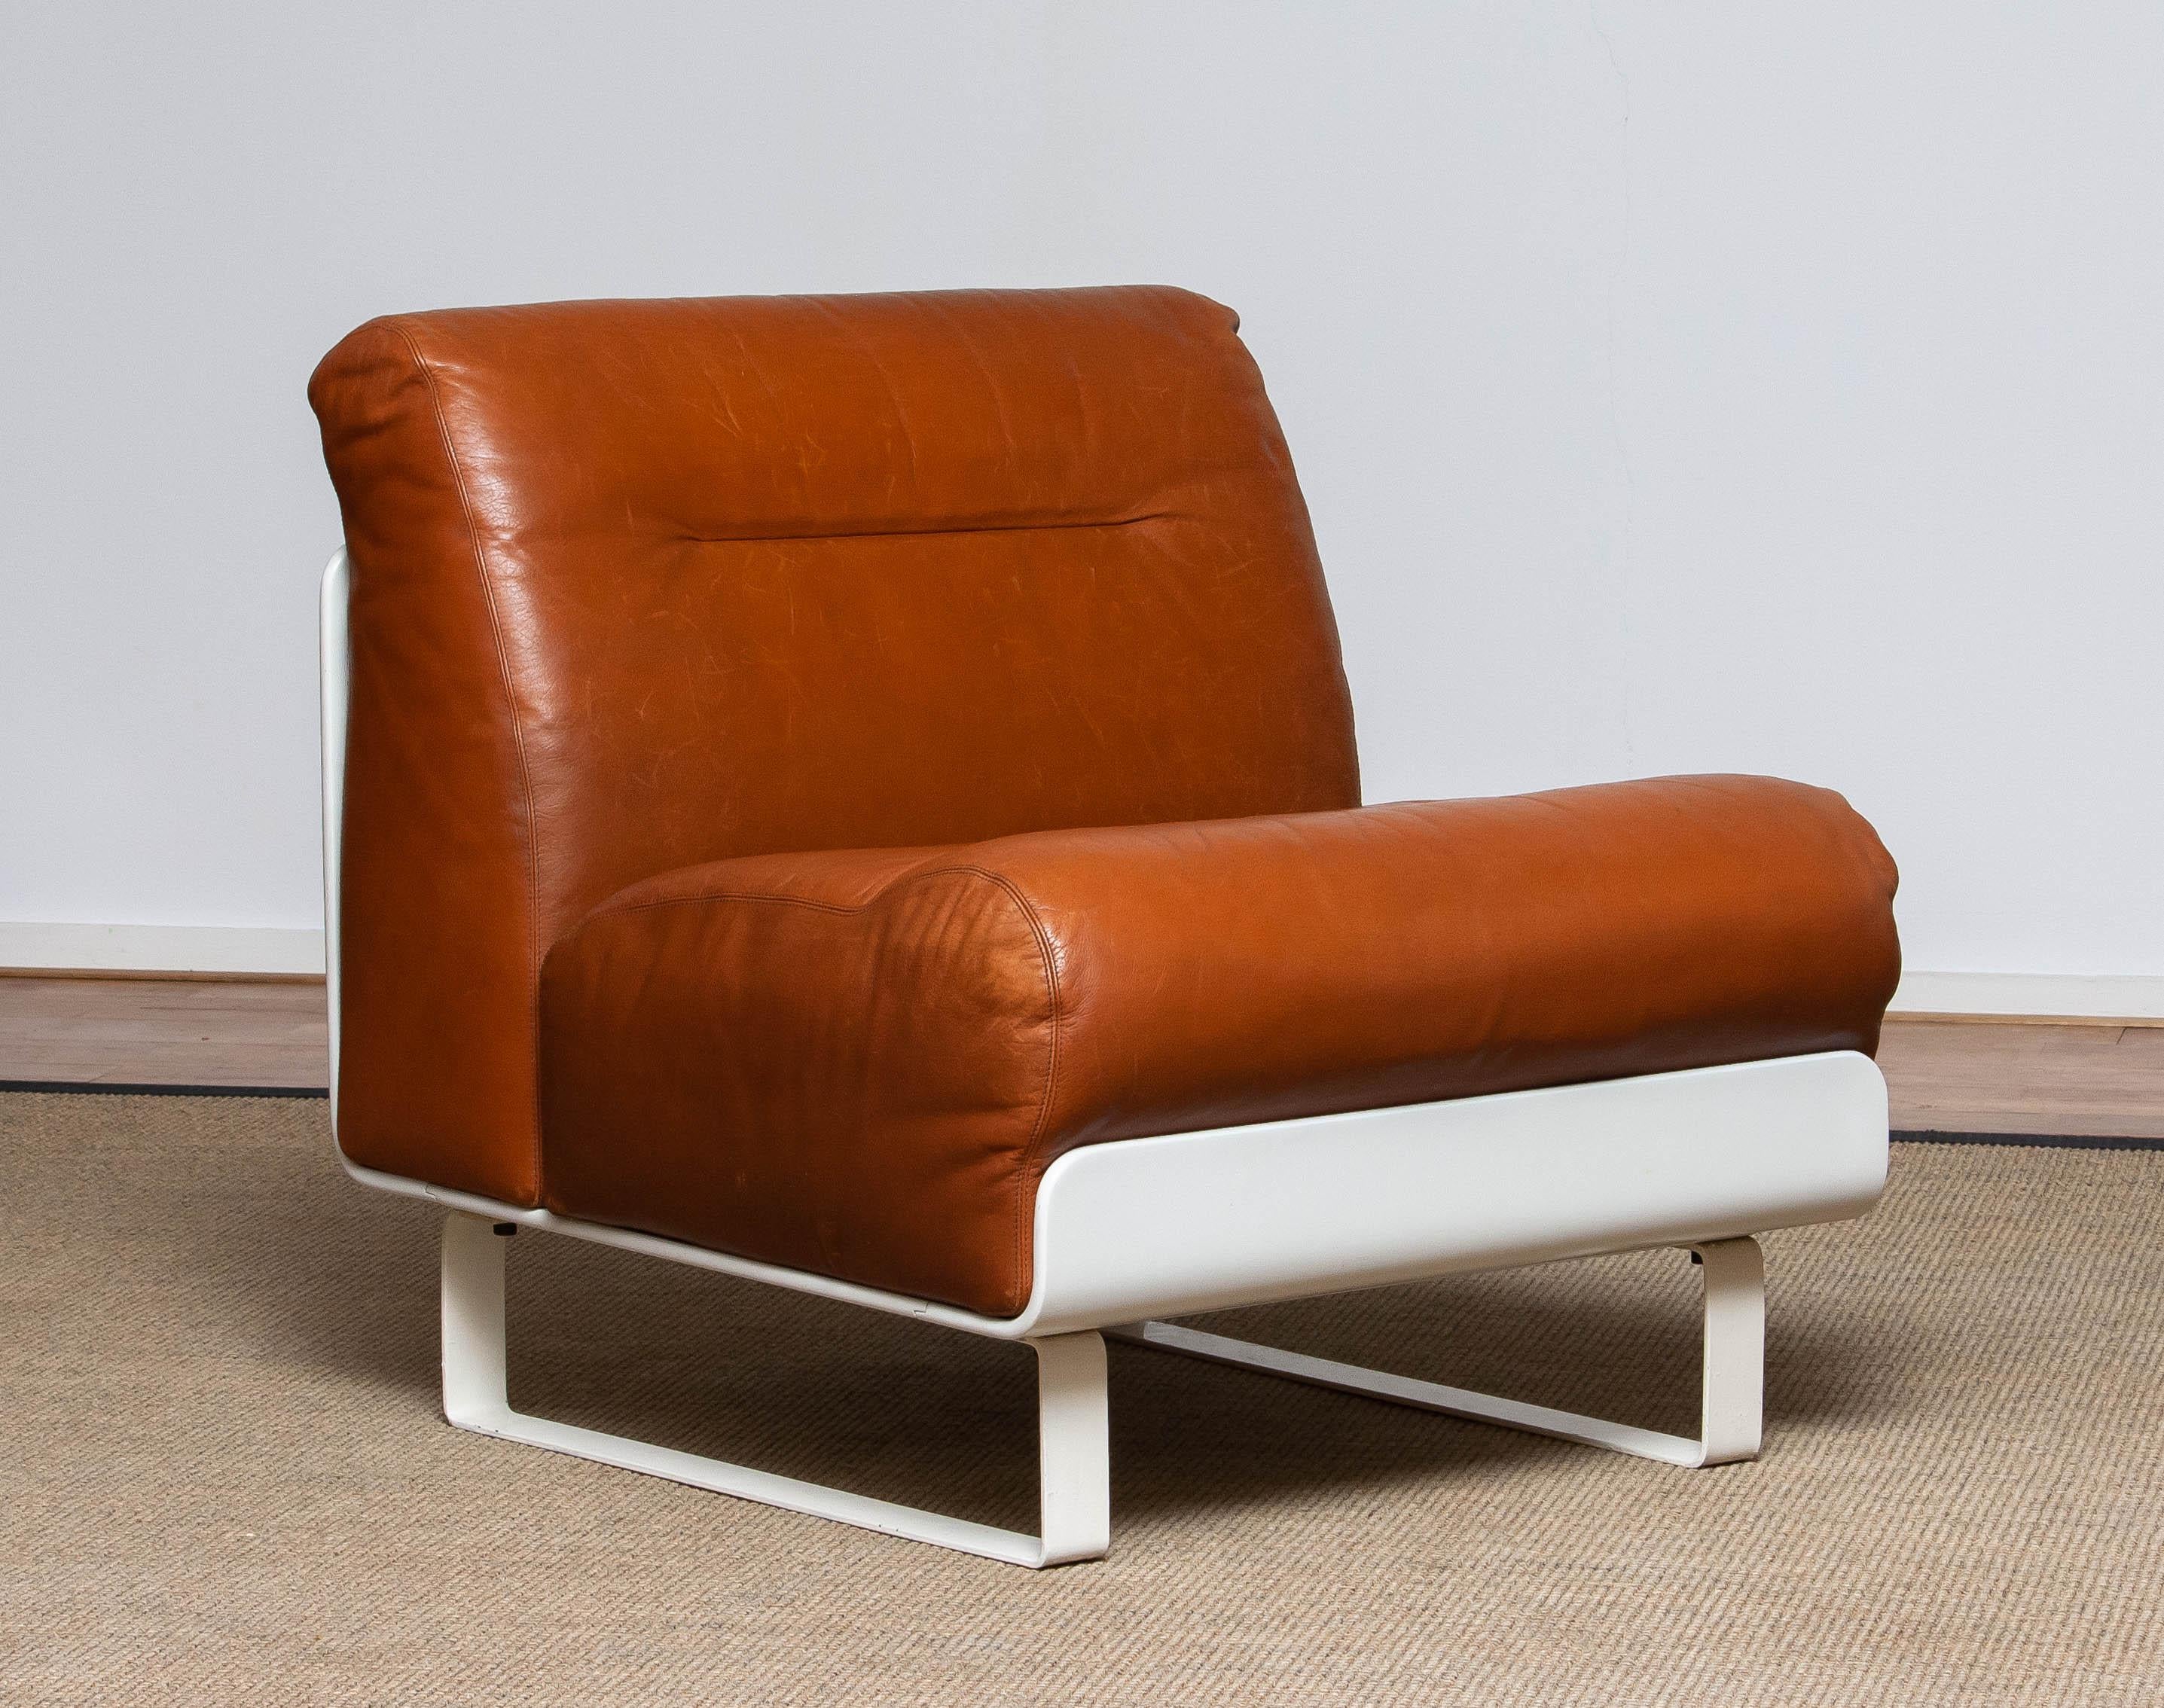 Space Age 1970's Tan / Cognac Leather Lounge / Club Chair with White Shell 'Orbis' by COR For Sale